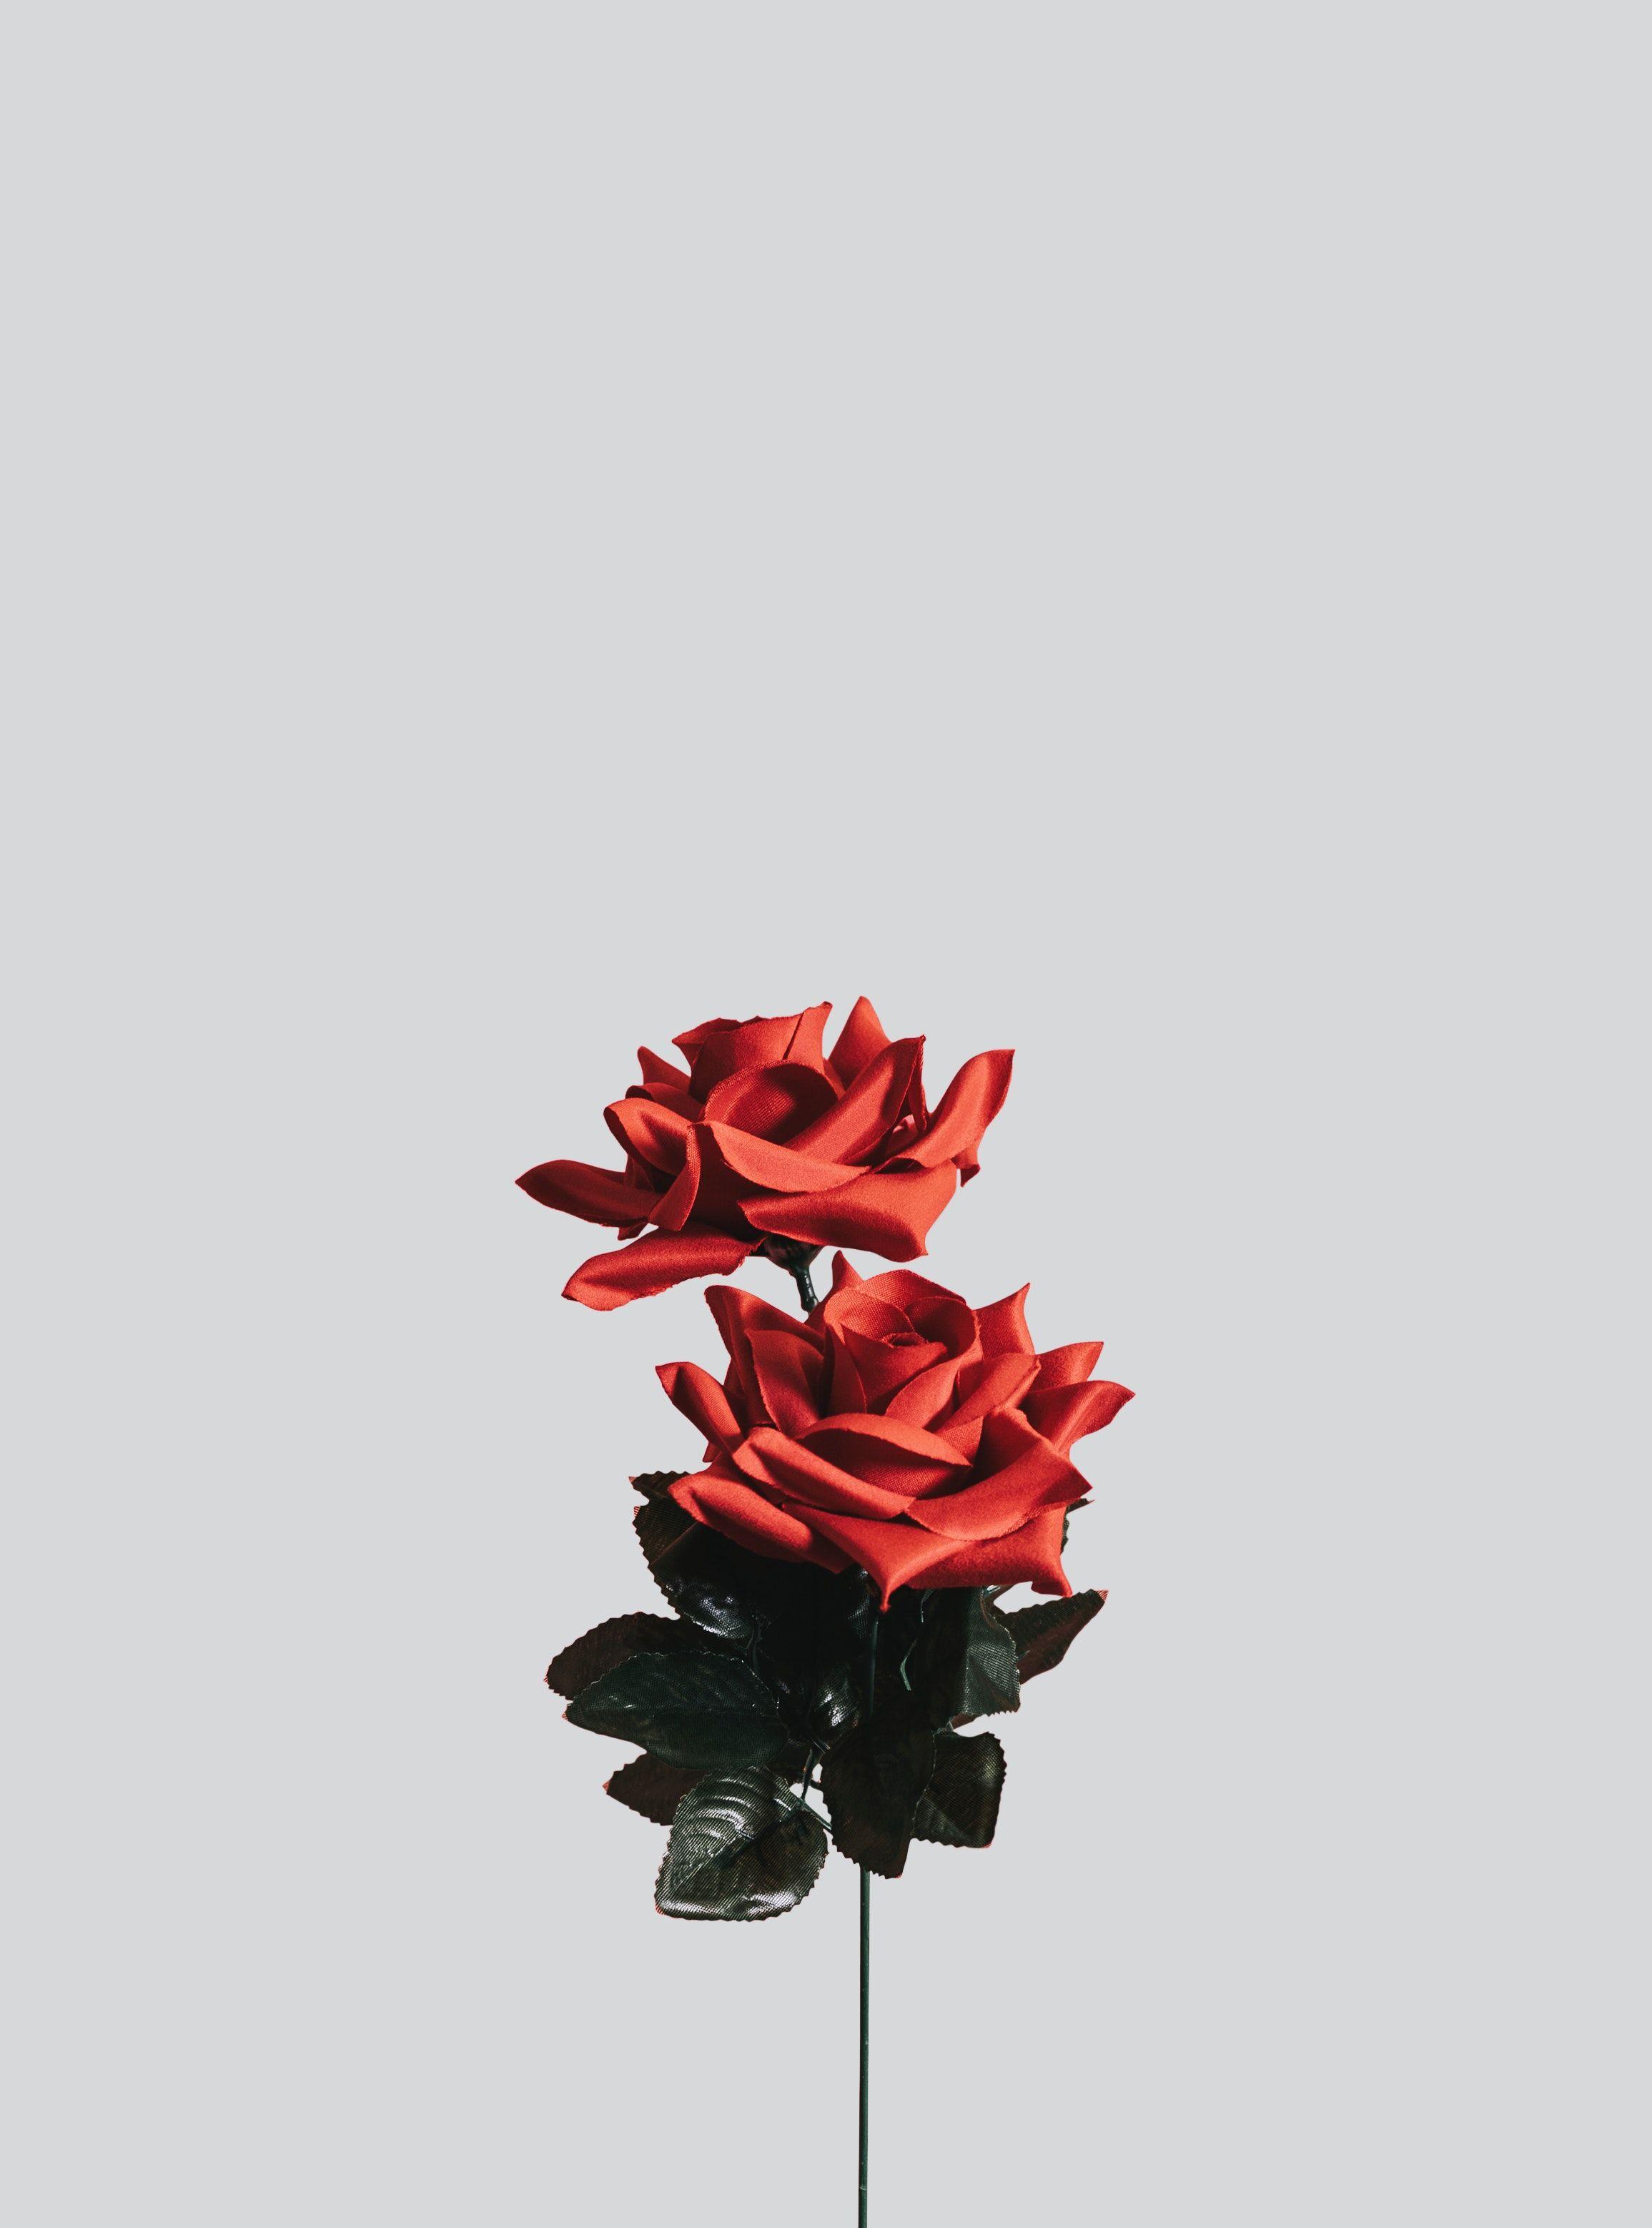 Minimalist Rose Wallpapers Top Free Minimalist Rose Backgrounds Wallpaperaccess